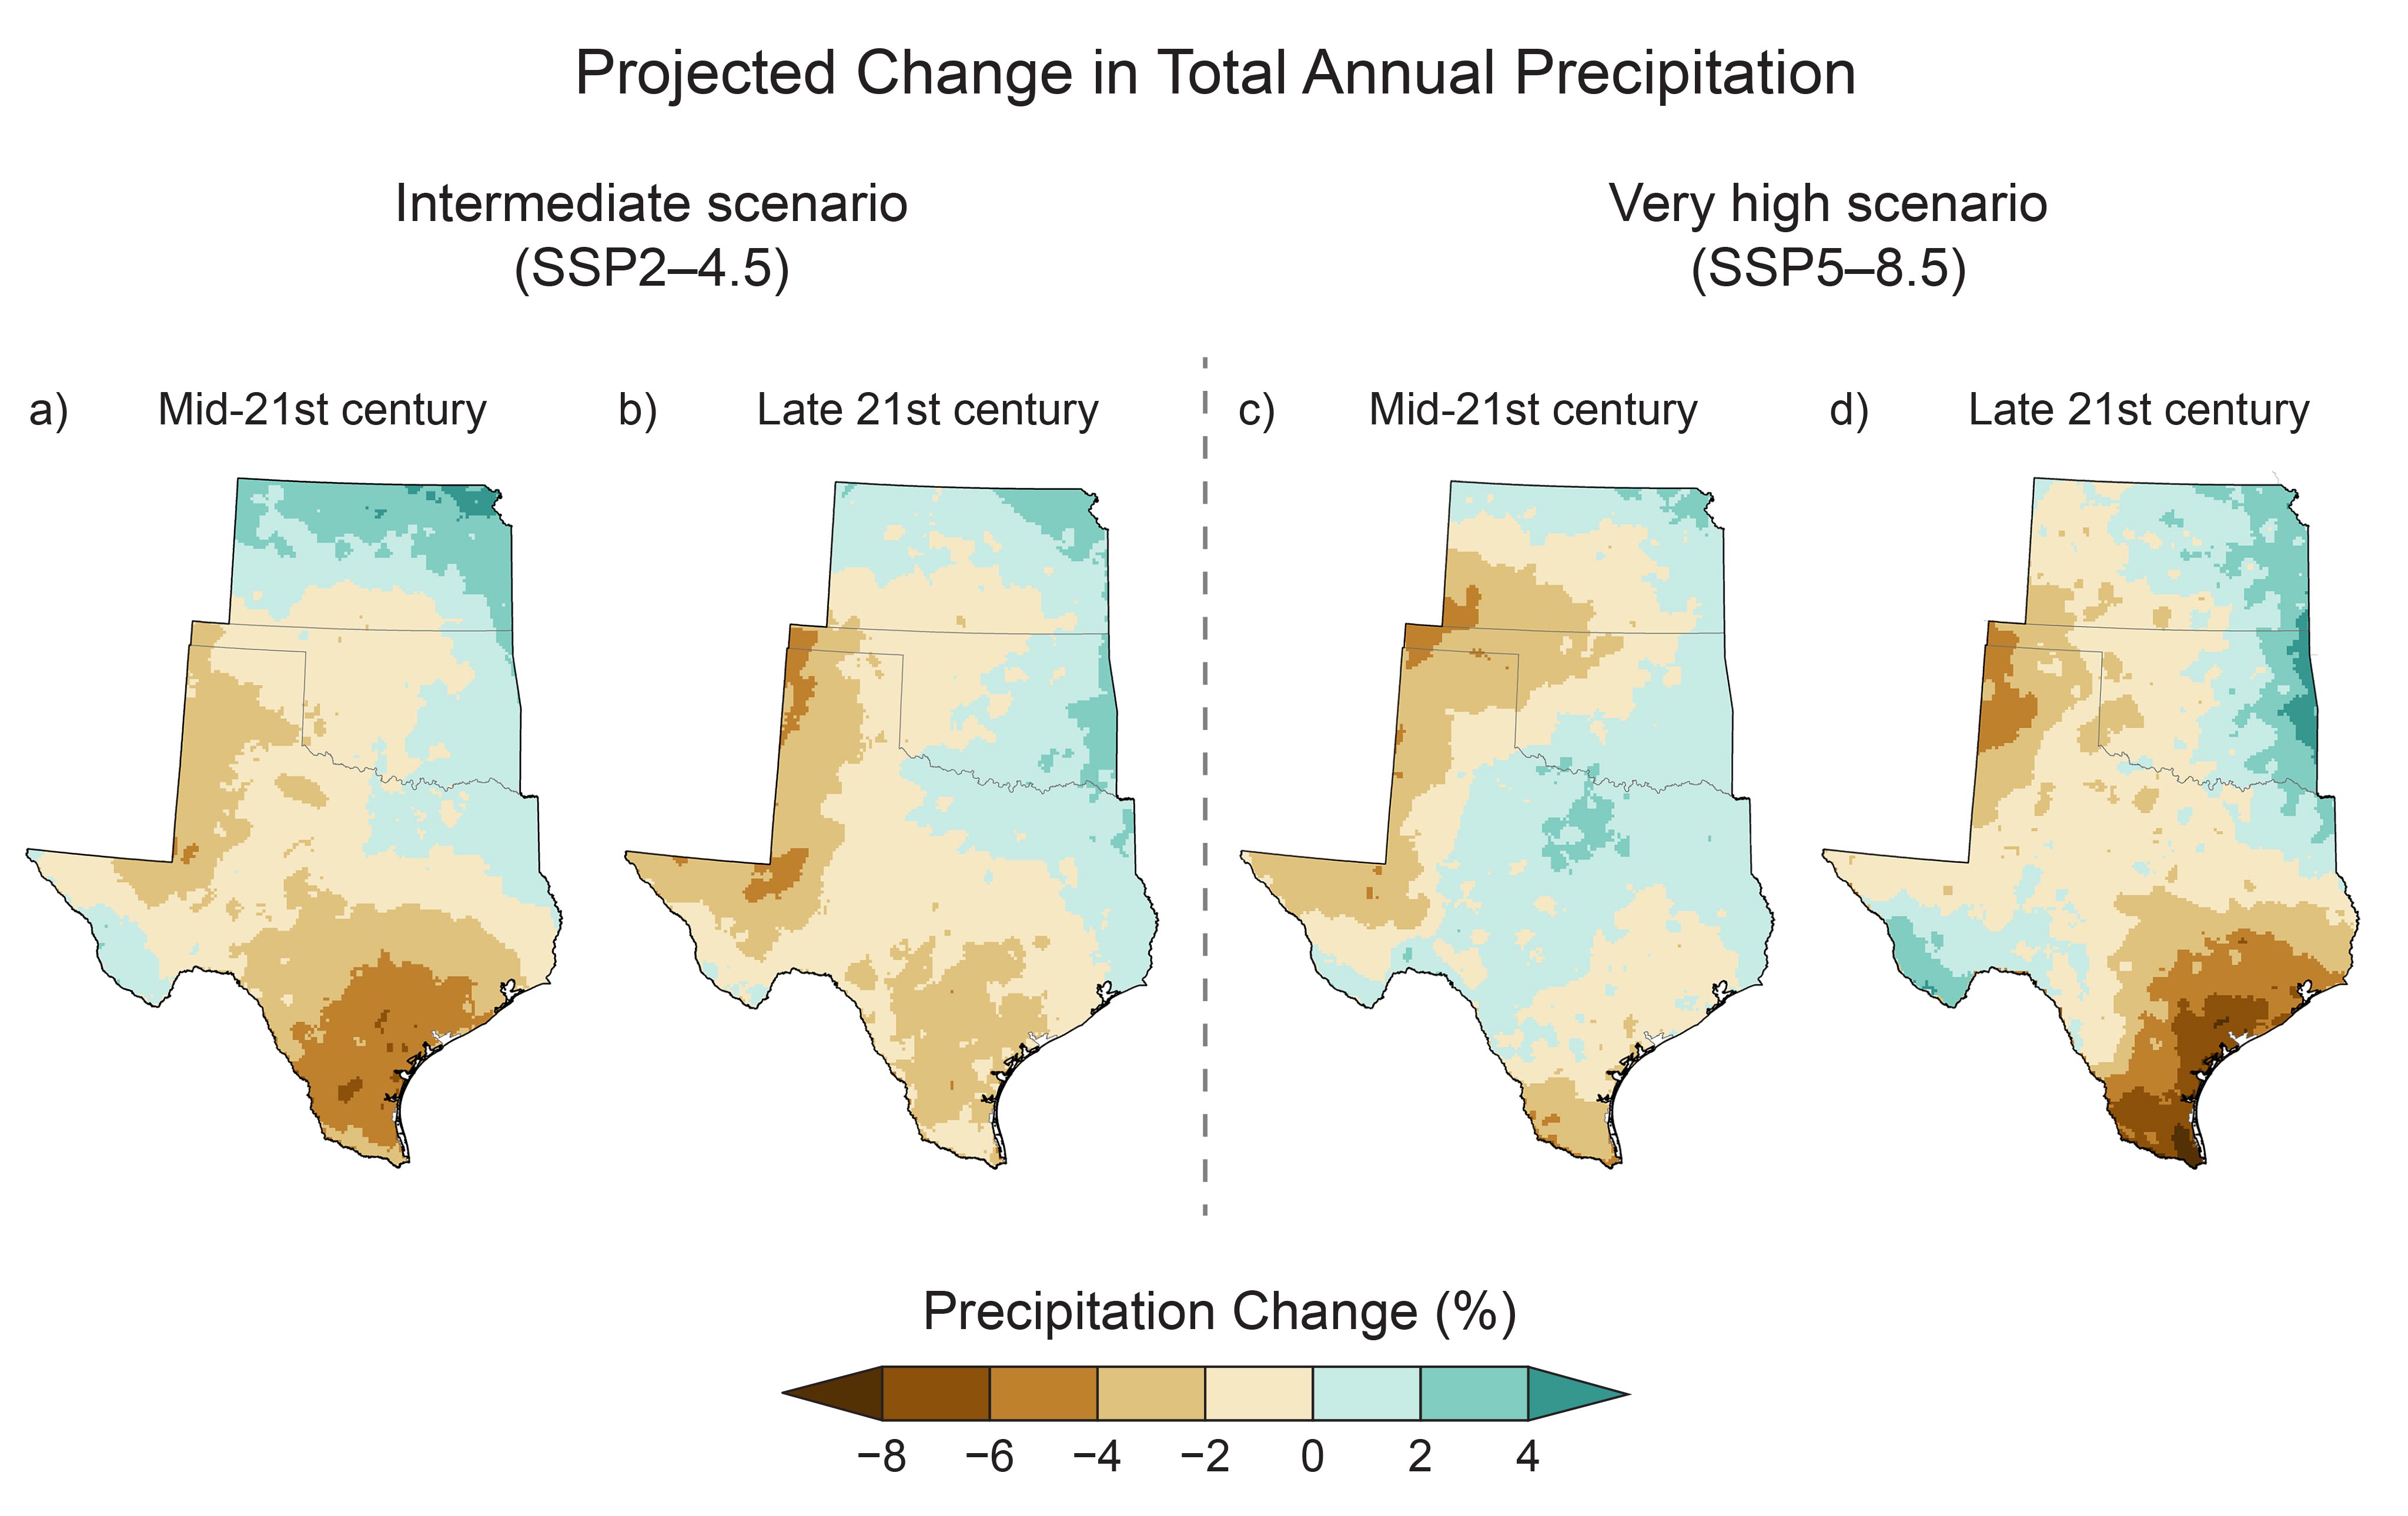 Projected Change in Total Annual Precipitation